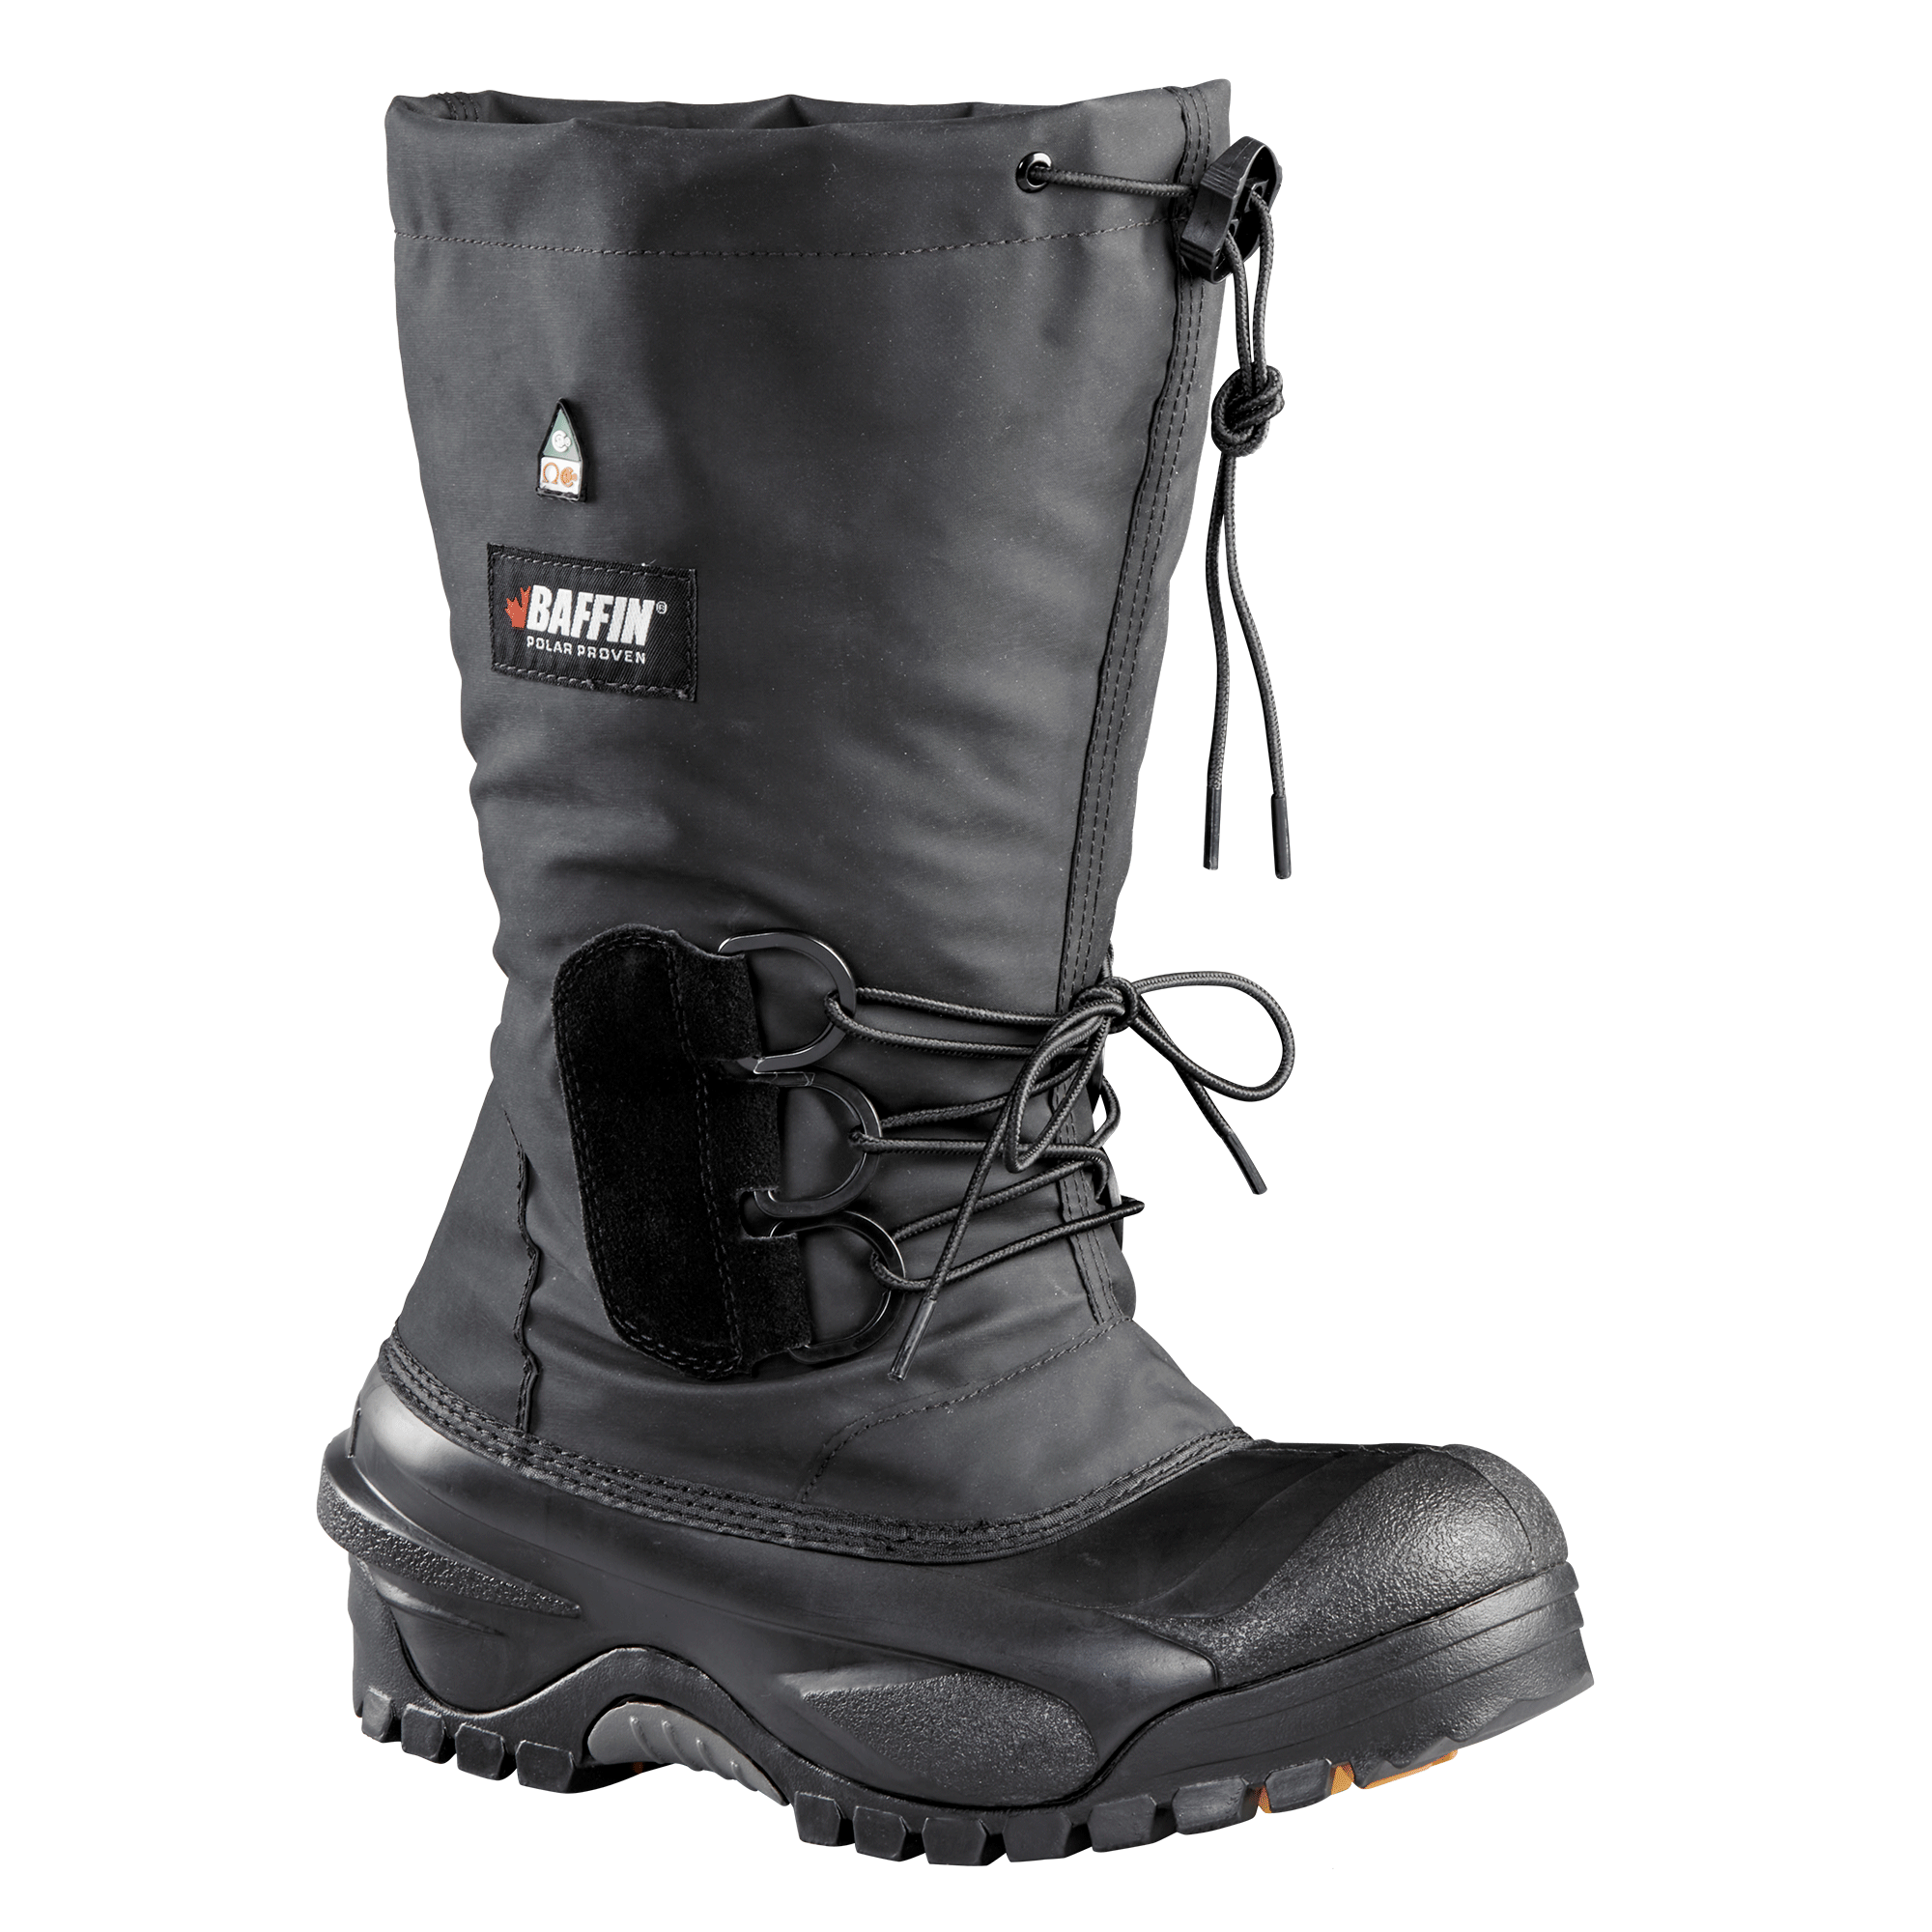 FORT MAC (SAFETY TOE & PLATE) | Men's Boot – Baffin - Born in the North '79